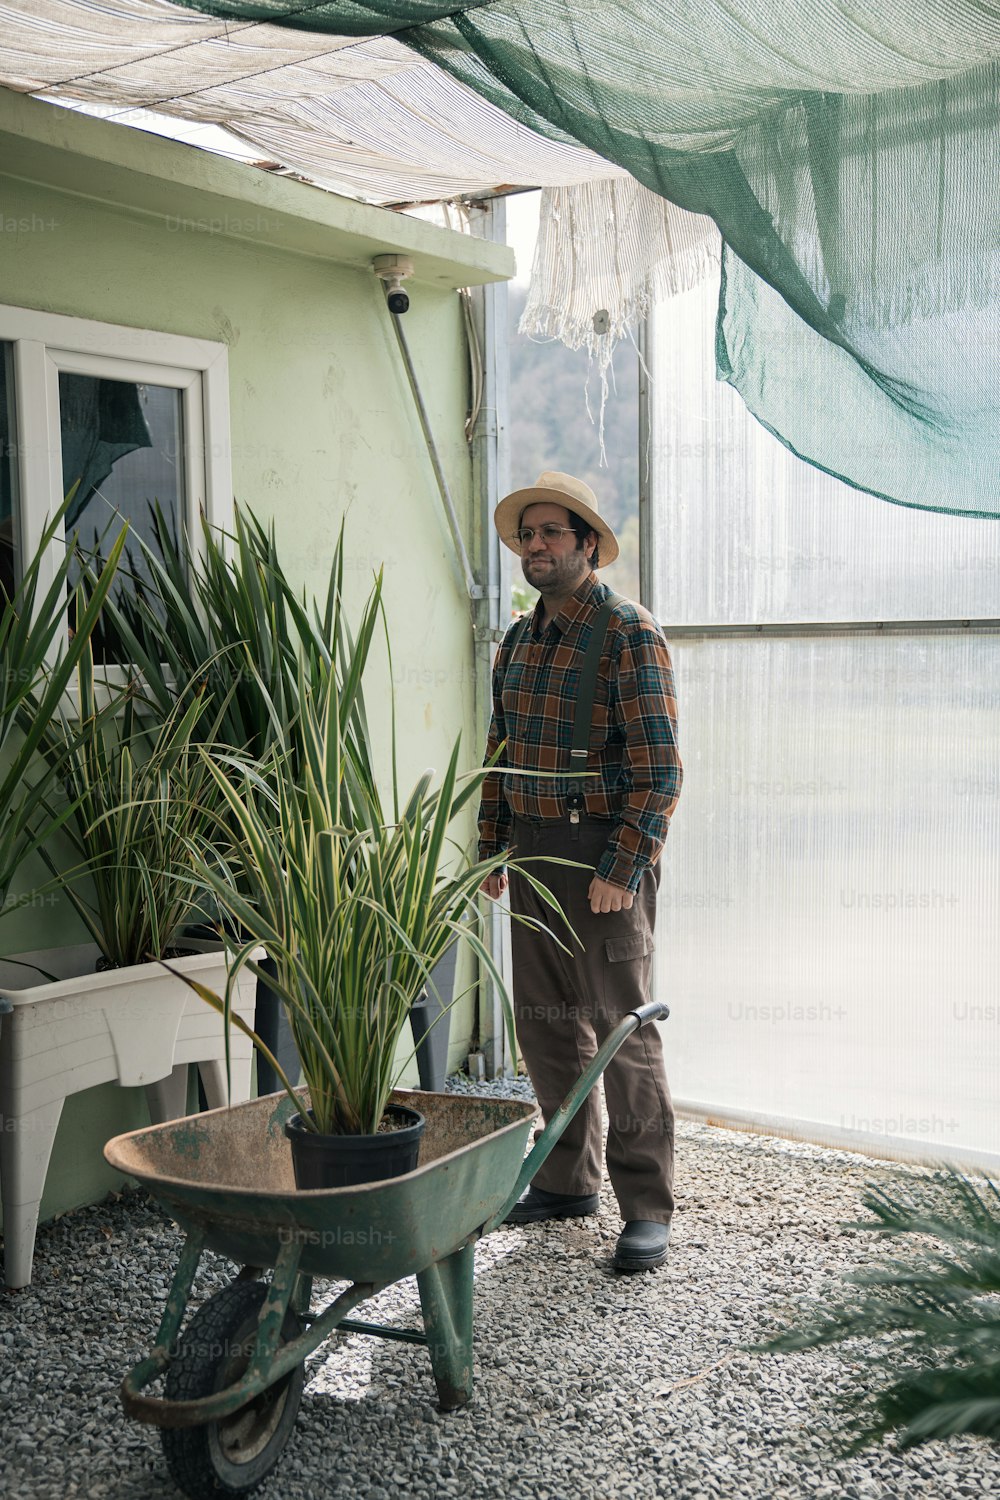 a man standing next to a wheelbarrow filled with plants